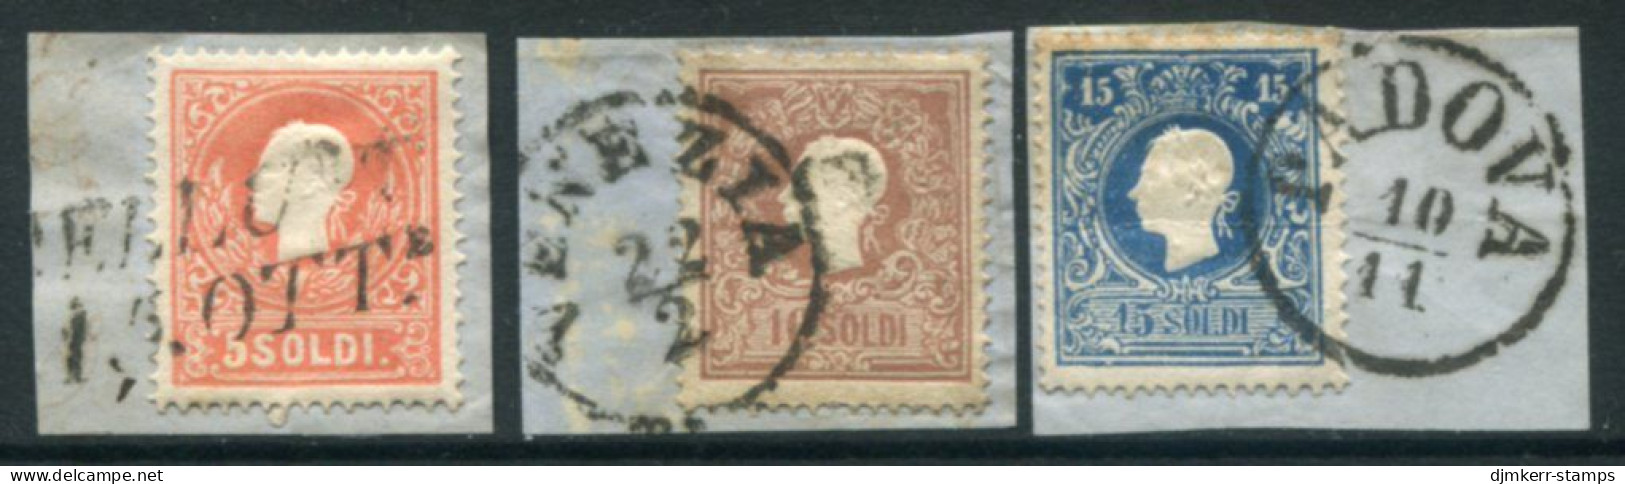 LOMBARDY-VENETIA 1858 Franz Joseph.5, 10 15 So. Type II Used On Pieces.  Michel 9-11 II - Used Stamps